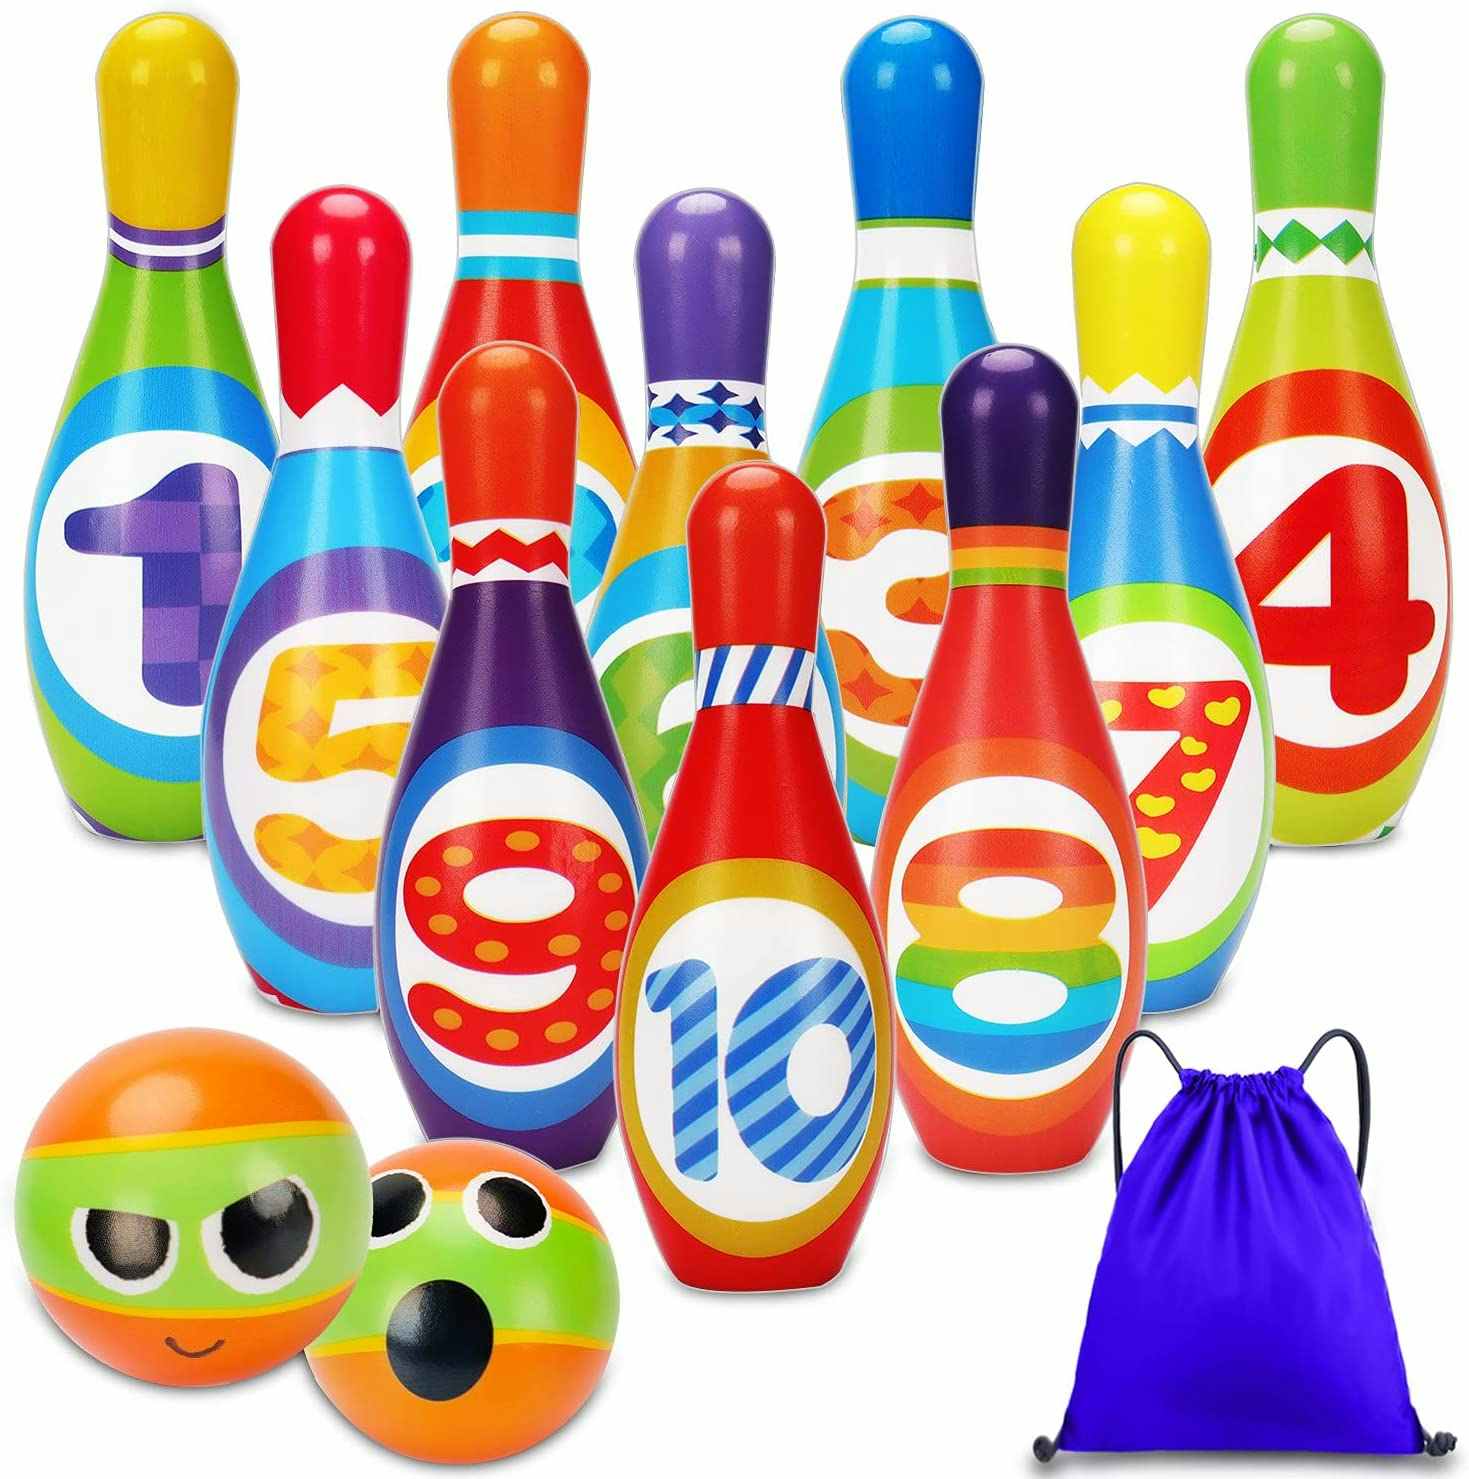 A AugToy Kids Bowling Set with numbered pins and colorful bowling balls on a white background.